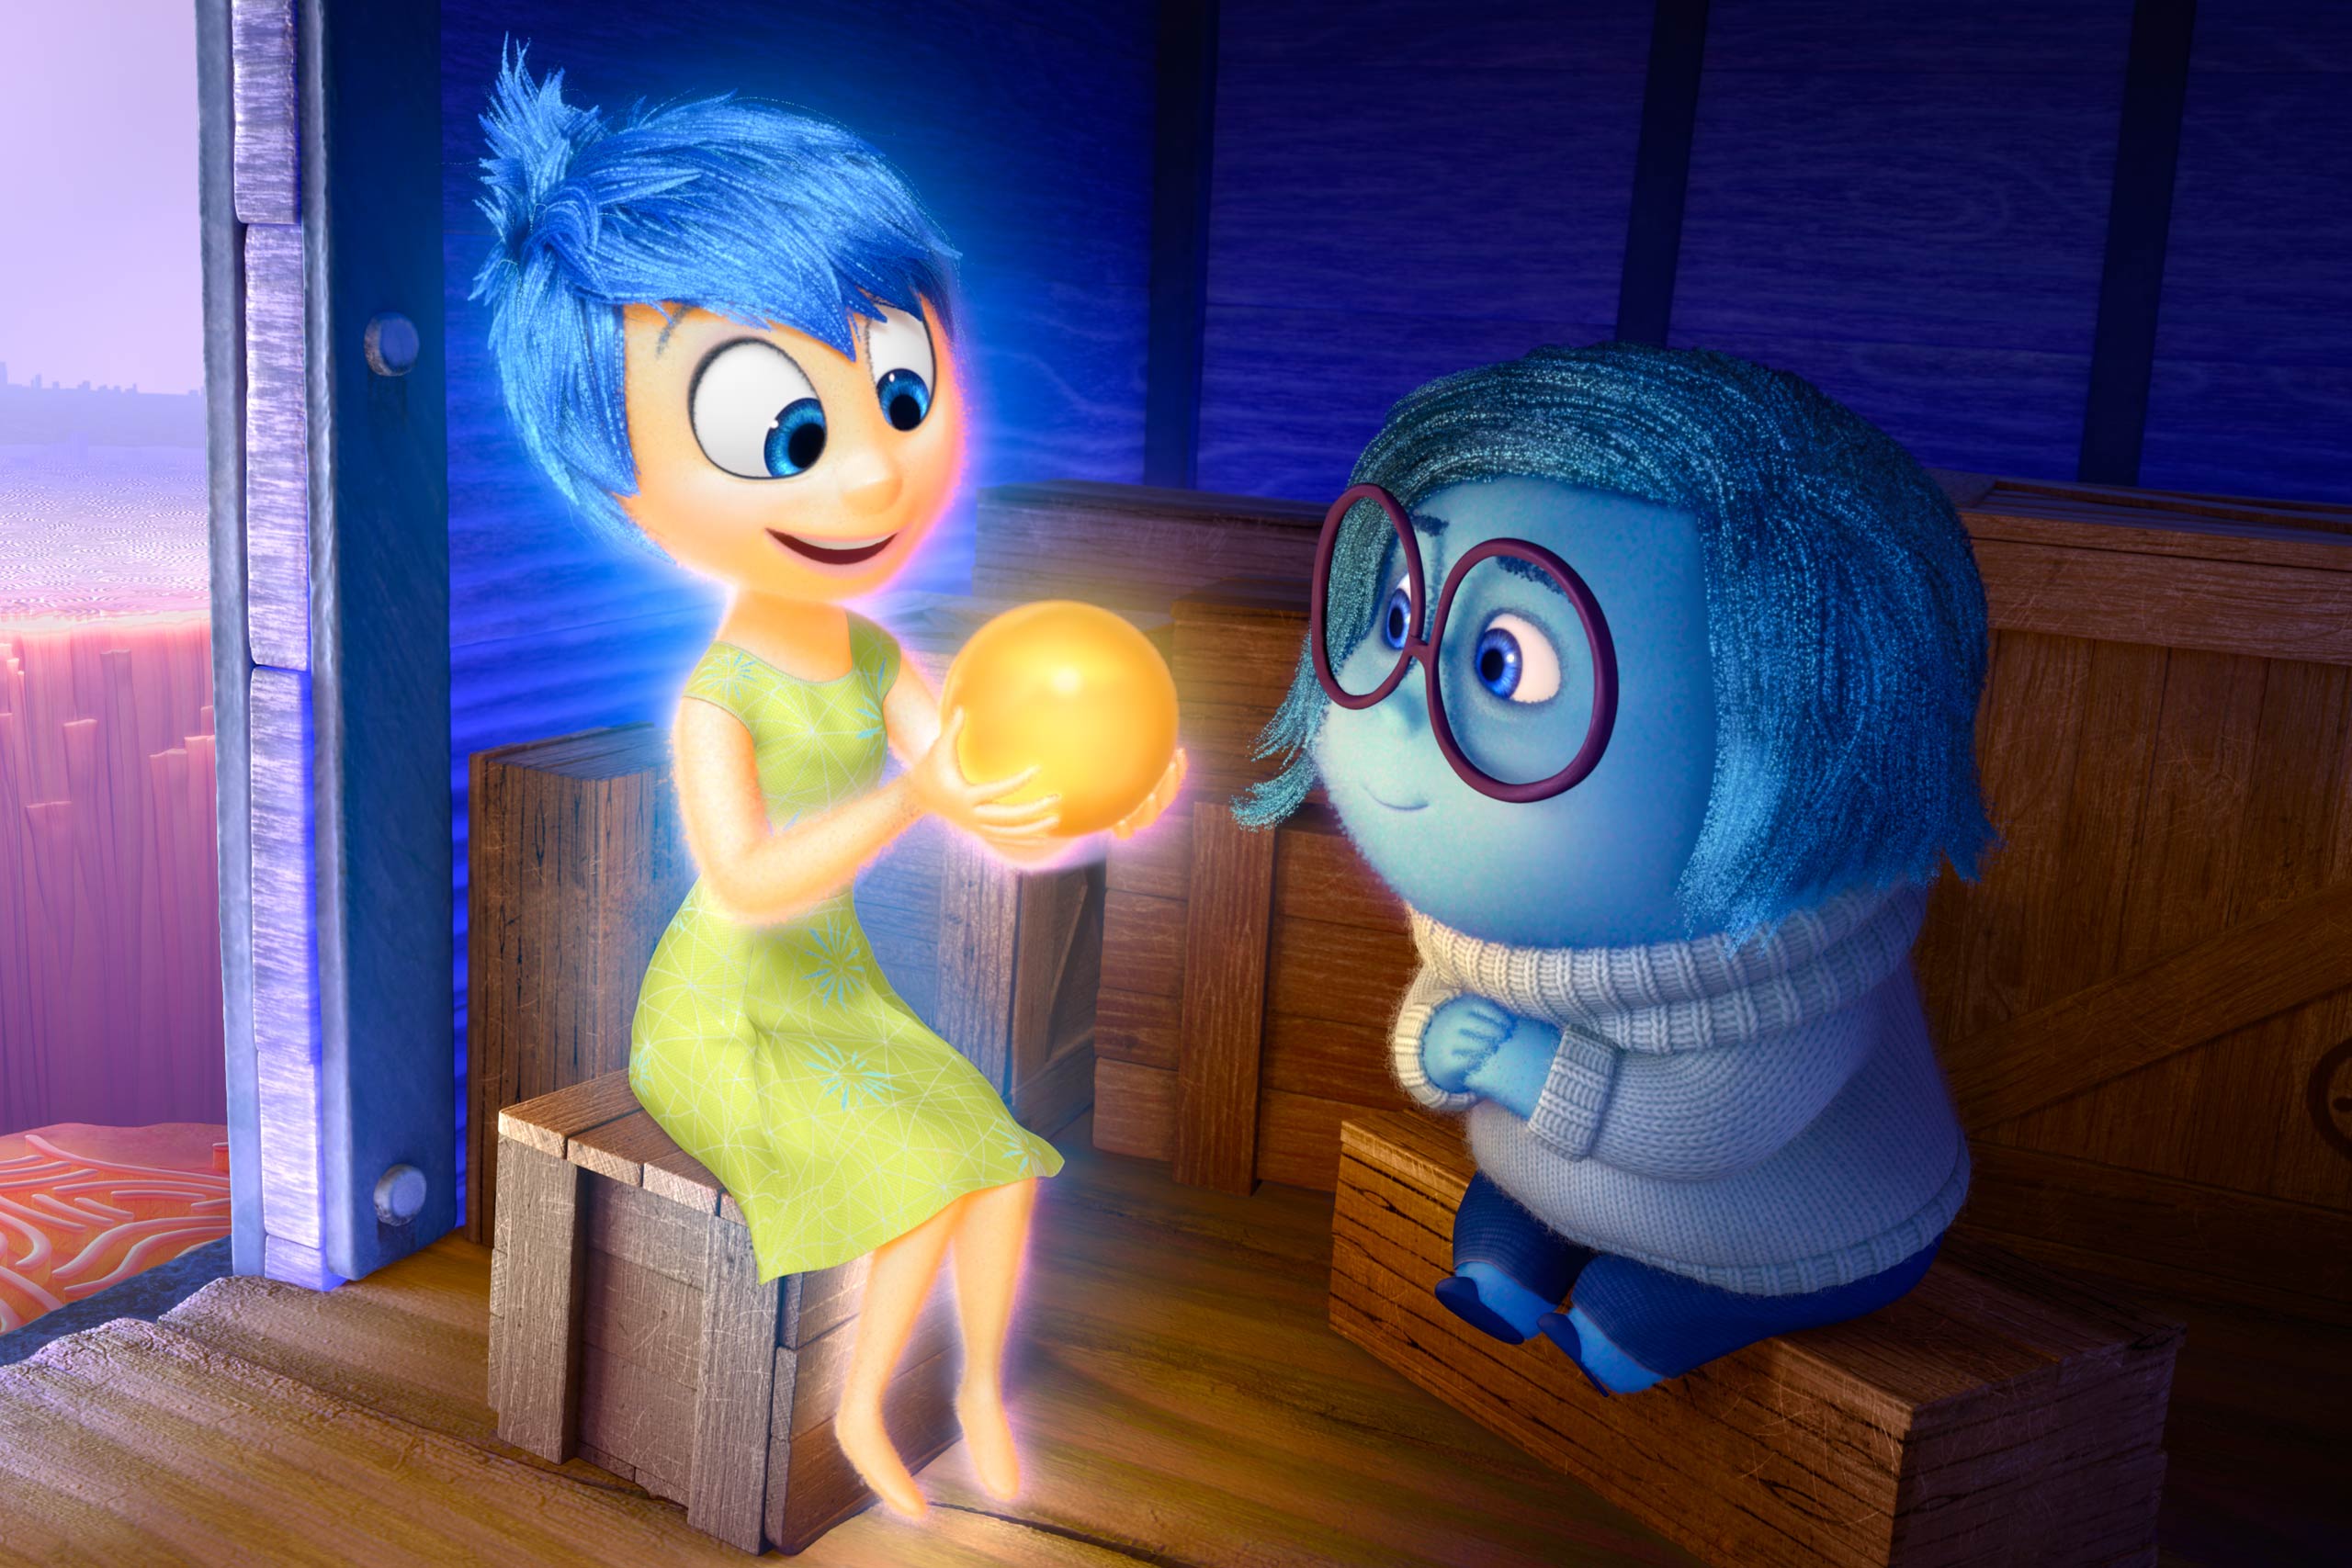 Amy Poehler stars as the personification of Joy, left, with Phyllis Smith starring as the voice of Sadness. (Pixar/Disney)